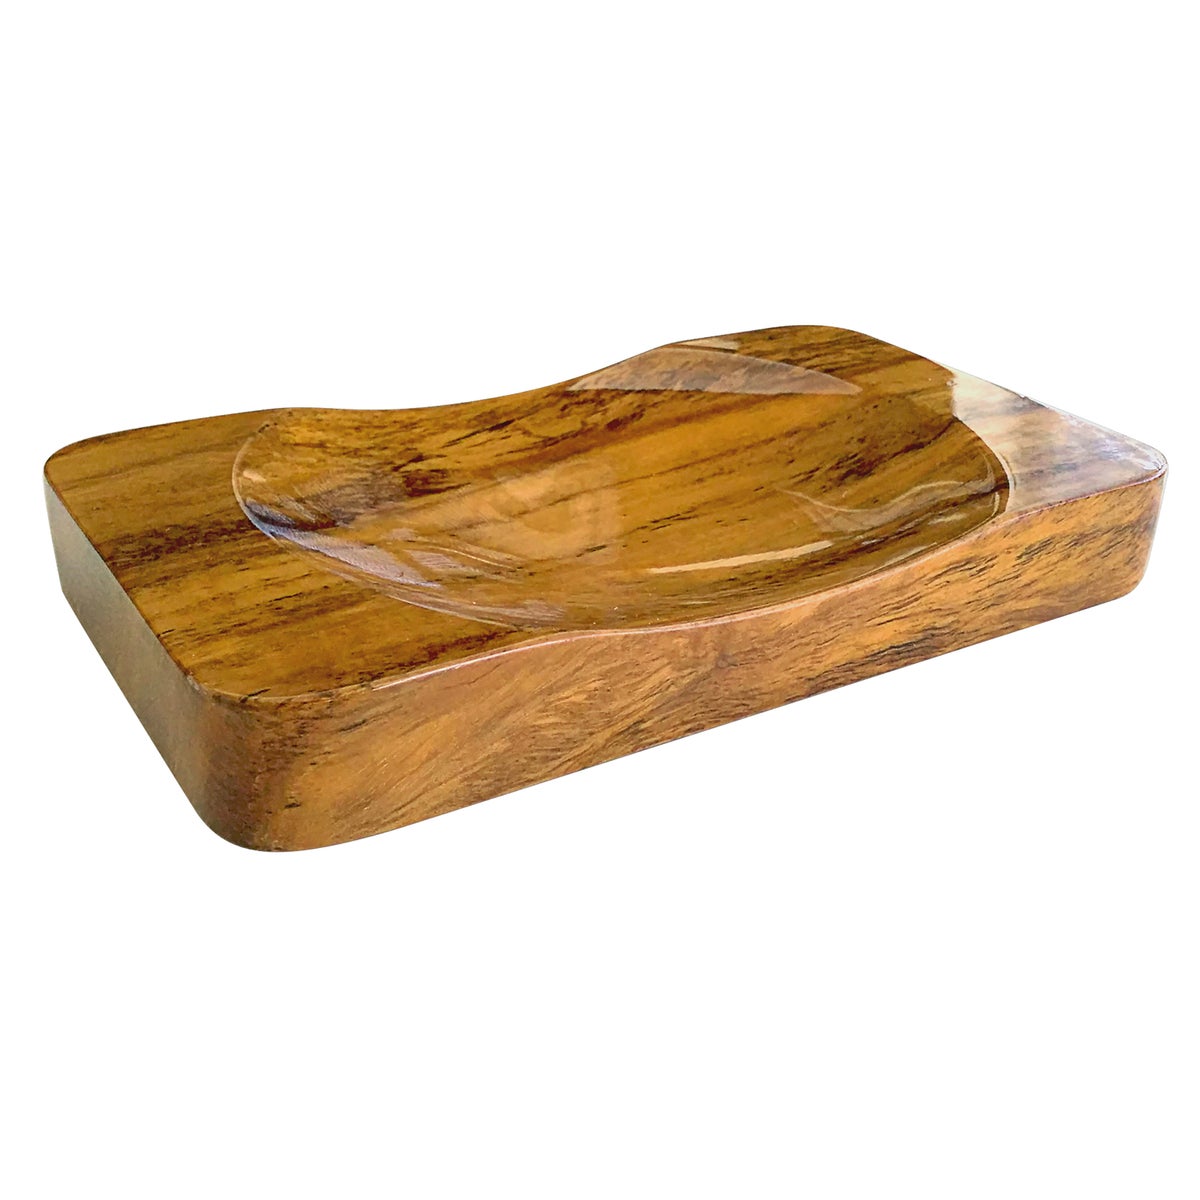 Captain's Soap Dish in Natural